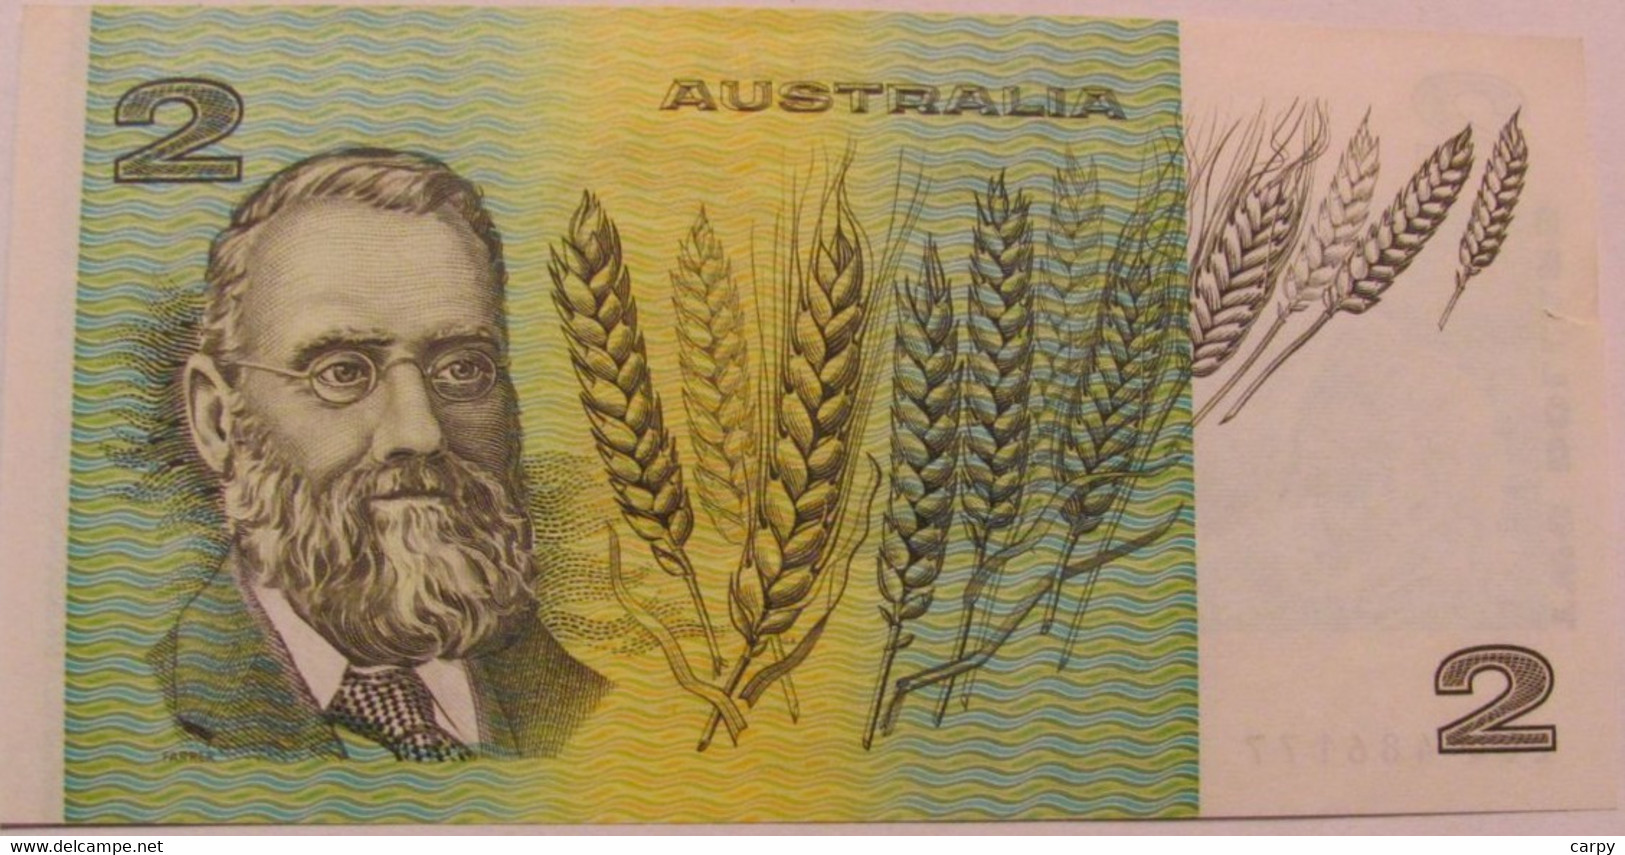 AUSTRALIA 2 Dollars 1985 / Signature Johnston & Fraser / Practically Is UNC, But Has A Small Marginal Tear At 21:00 Hour - 1974-94 Australia Reserve Bank